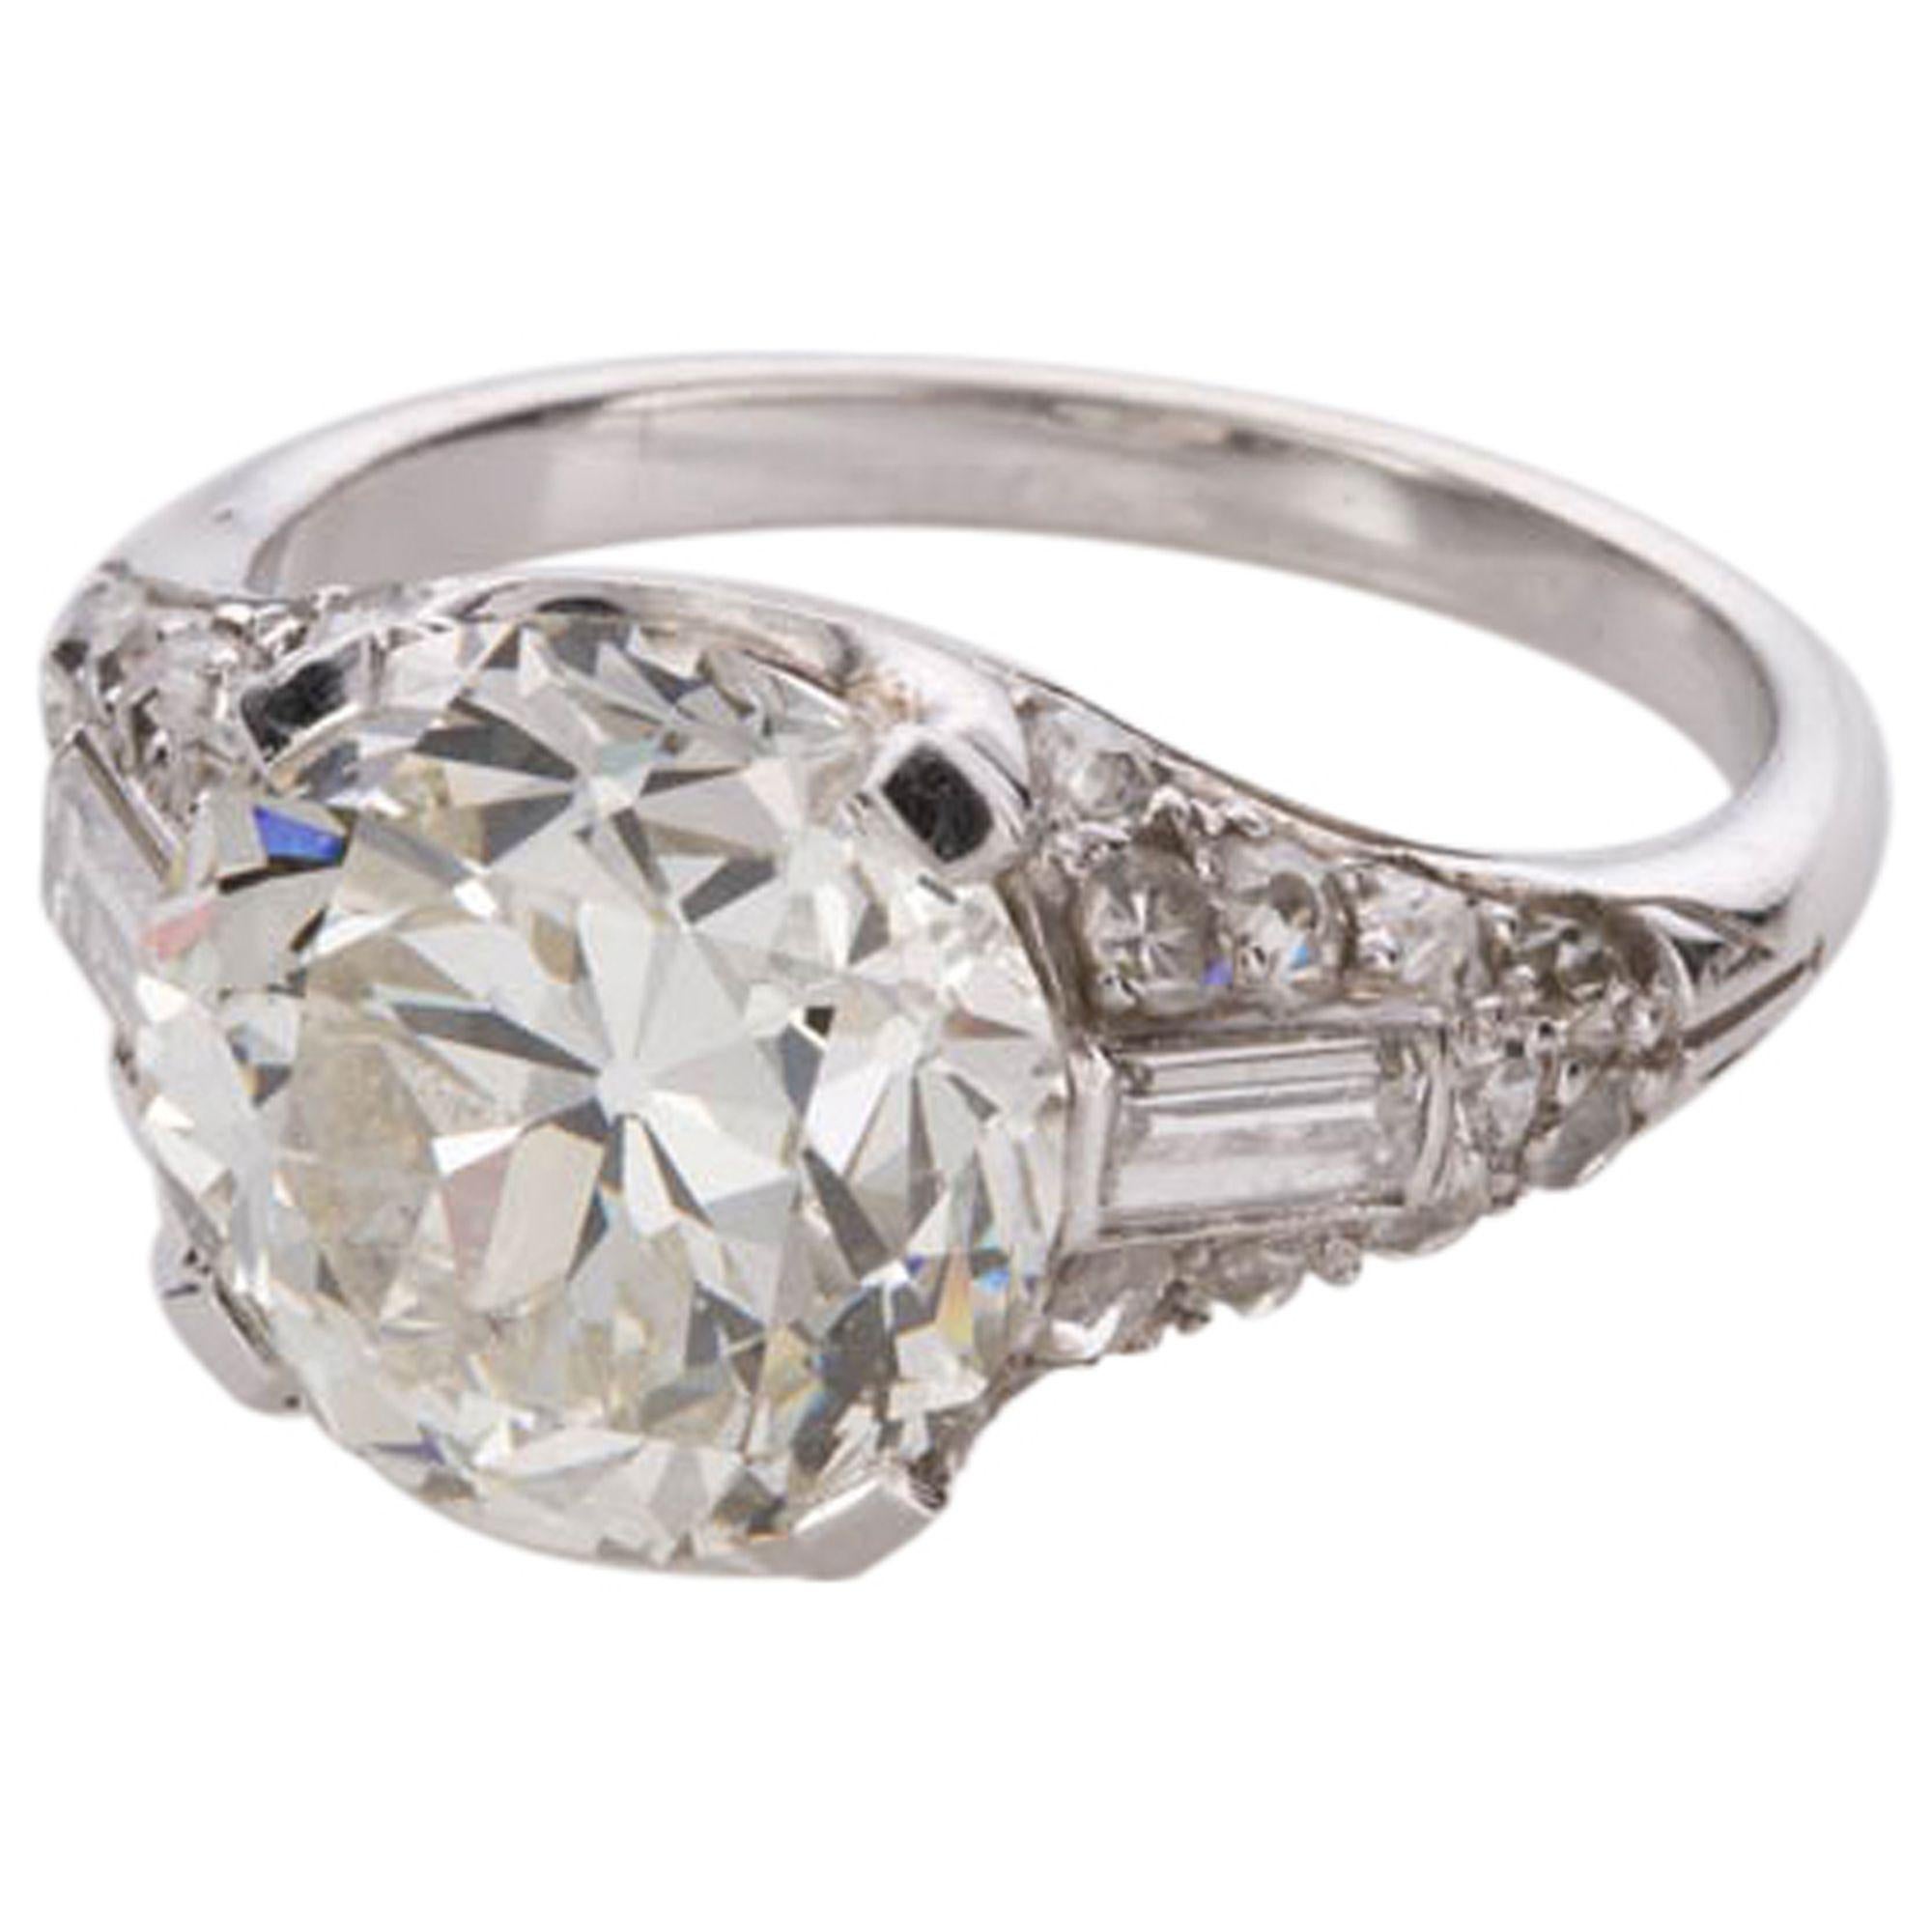 Are you looking for the perfect engagement ring or maybe a ring to celebrate a special milestone in your life. 
This original Art Deco 1920's ring is set with a central 4.21ct old European cut diamond, having all the charm of the Deco period yet